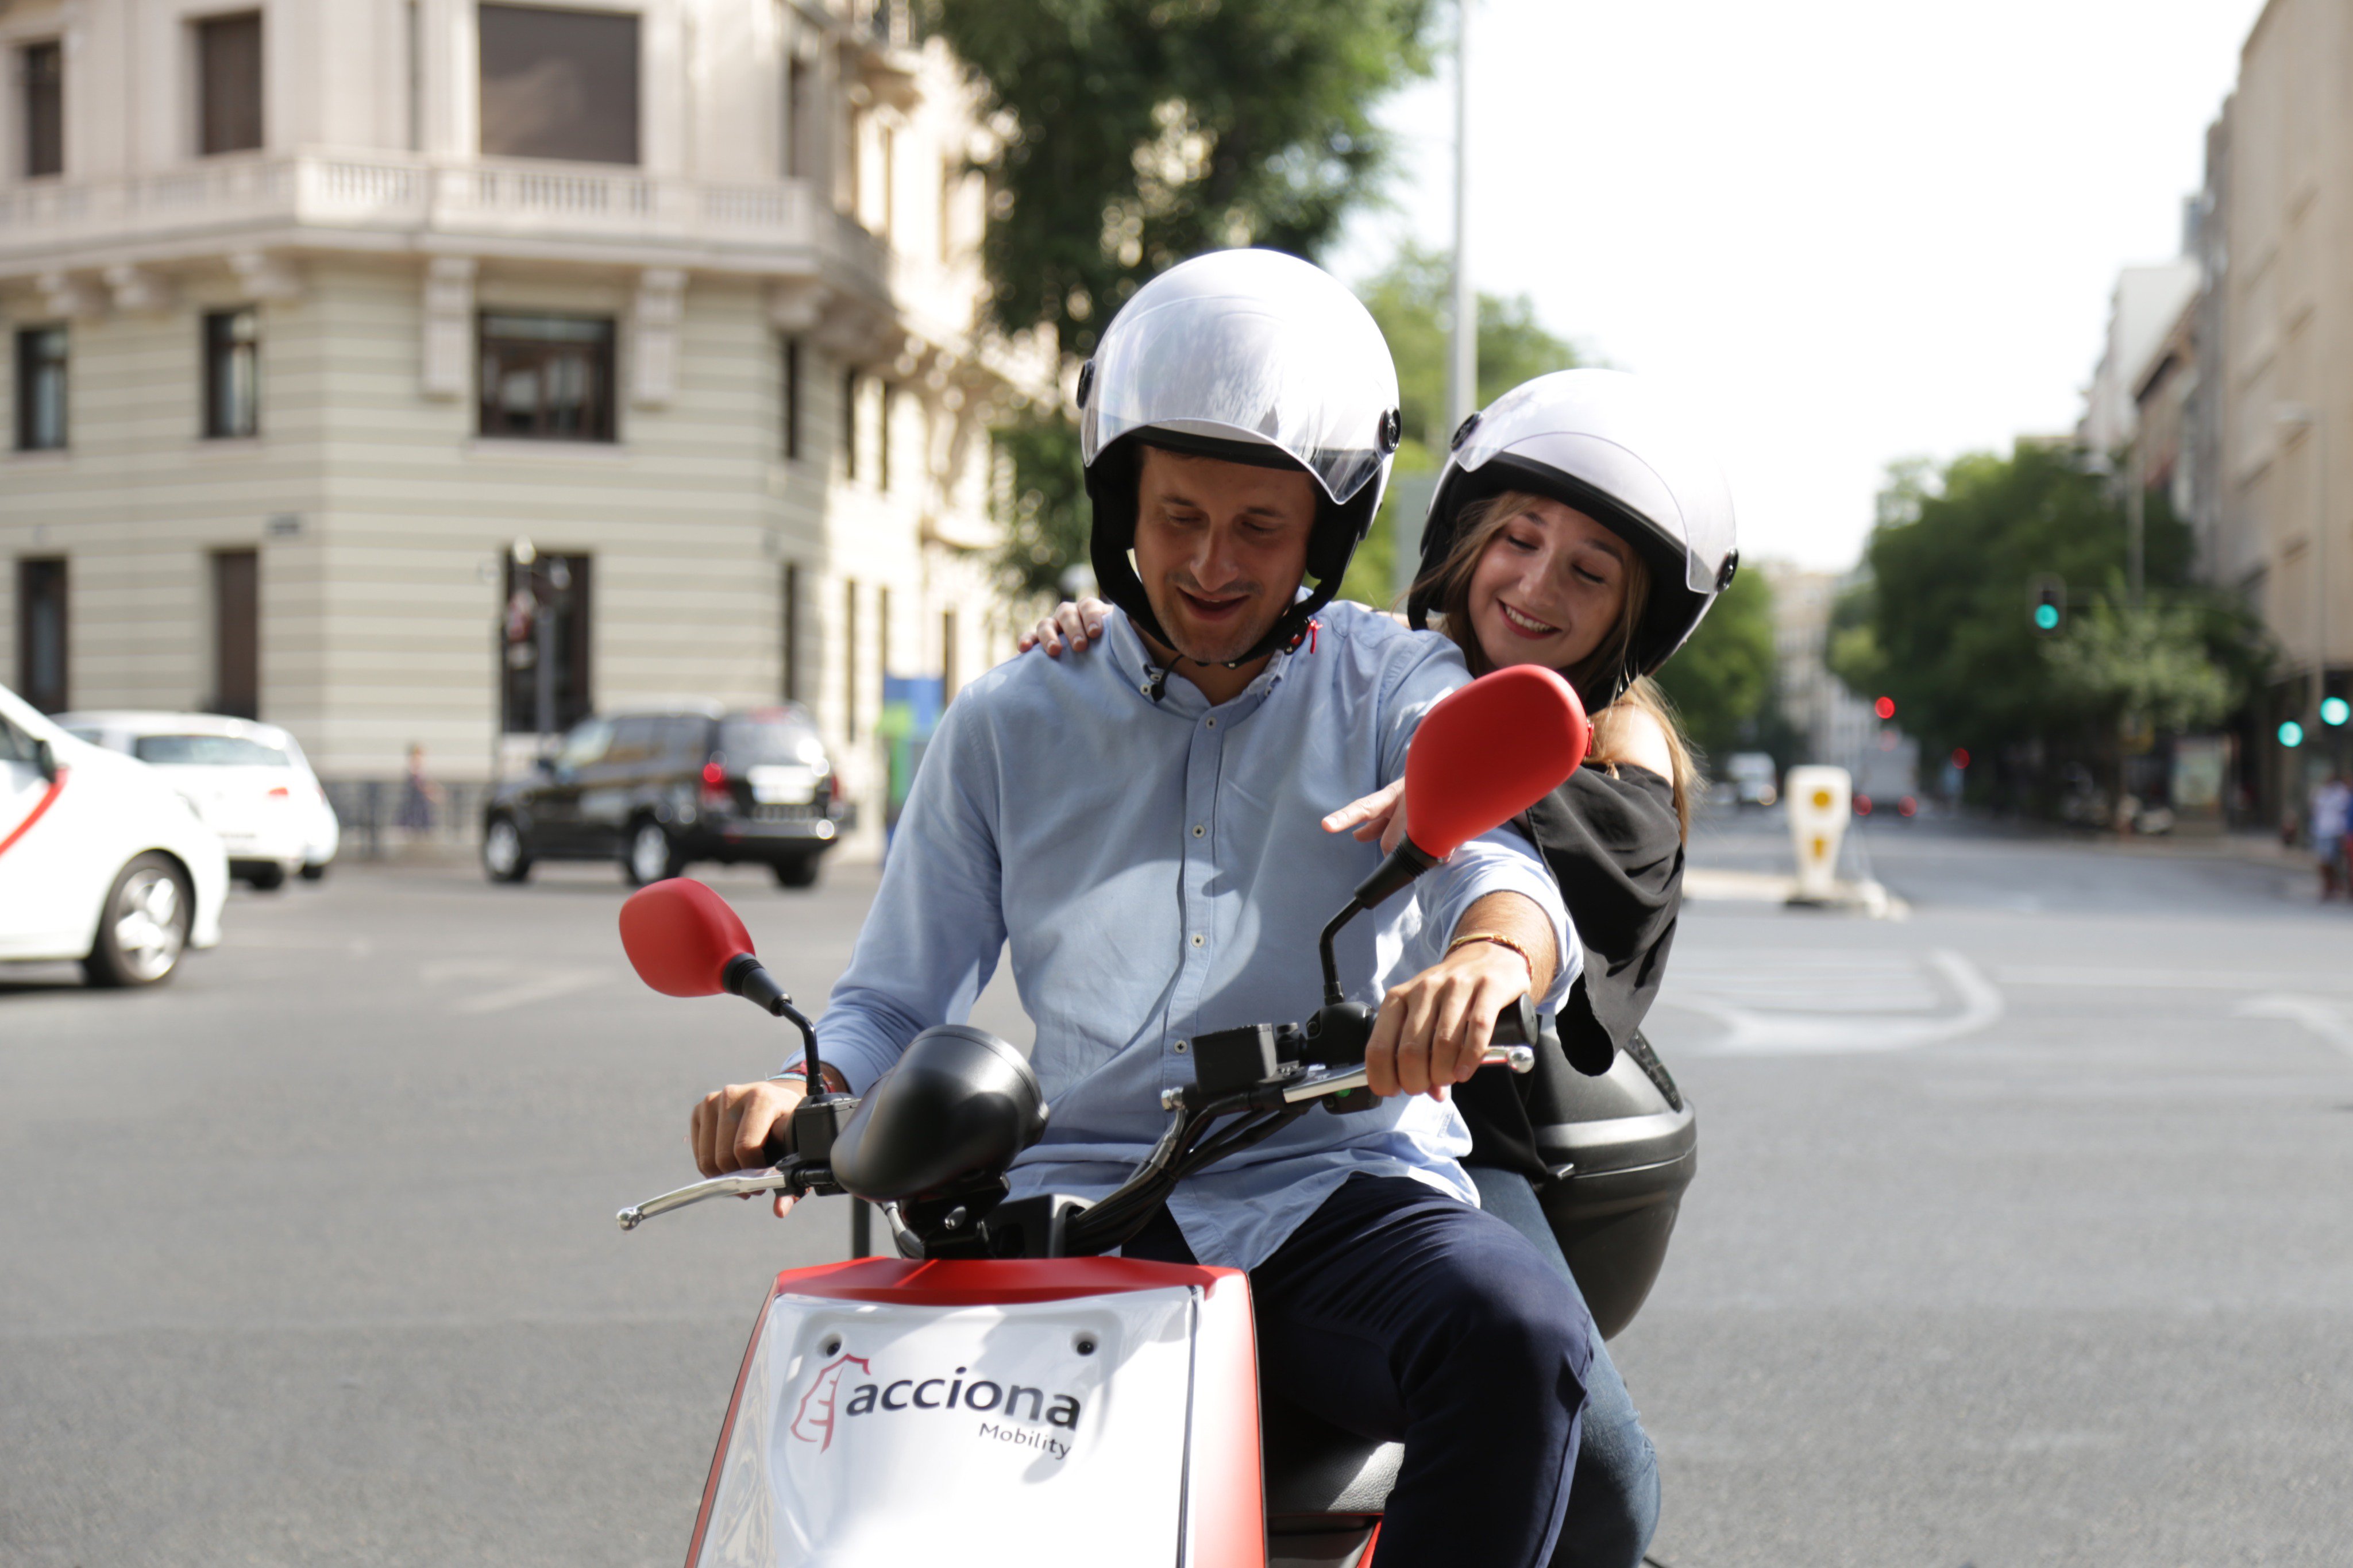 ACCIONA (English) on Twitter: "Launching our Motosharing service with more 1,000 electric 🛵 in #Madrid as part of our sustainable mobility initiative: @AccionaMoto https://t.co/u9pRVwIARs" / Twitter